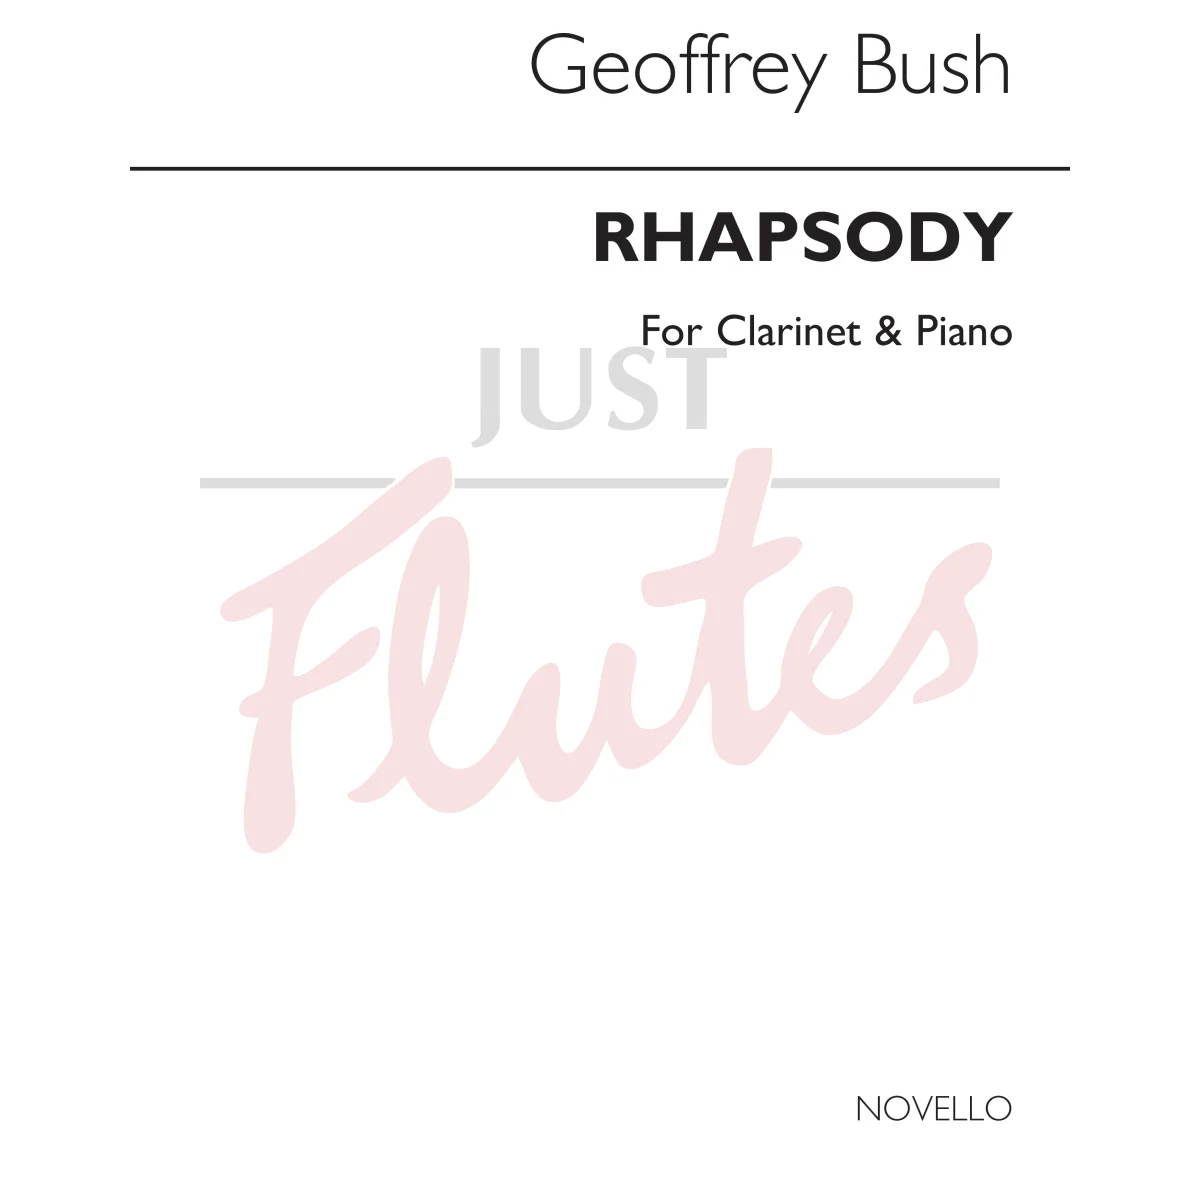 Rhapsody for Clarinet and Piano